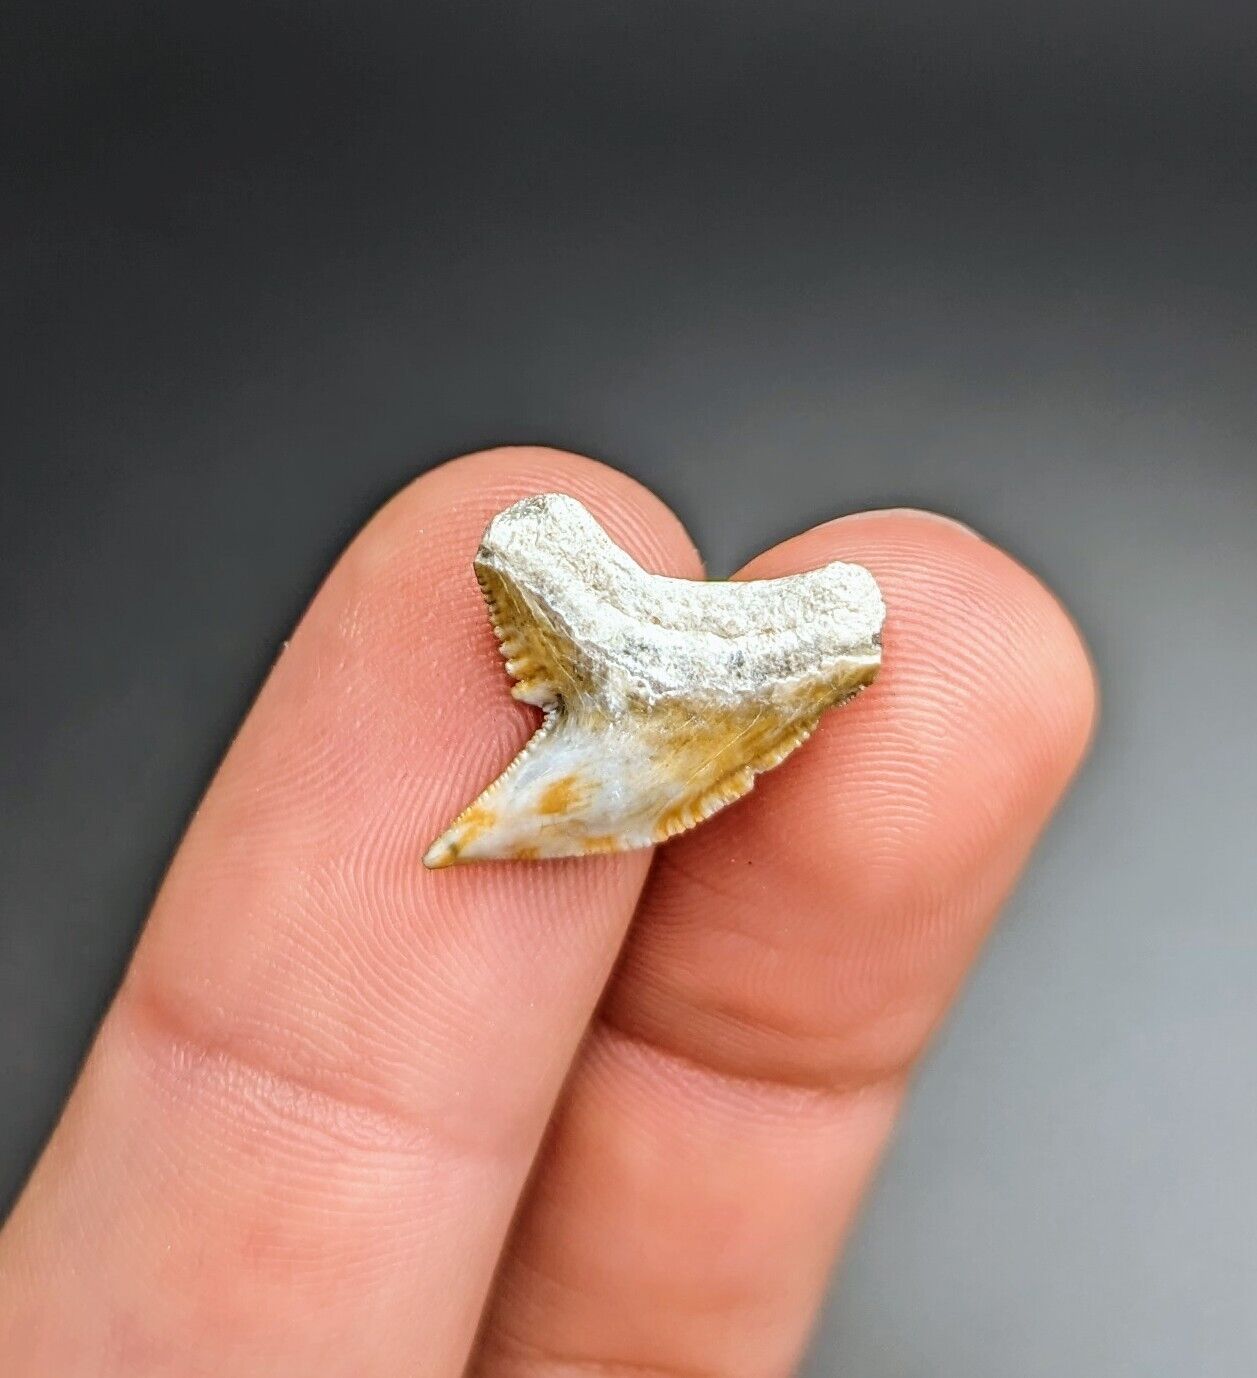 Sweet White And Yellow Tiger Shark Tooth From Gainesville Florida